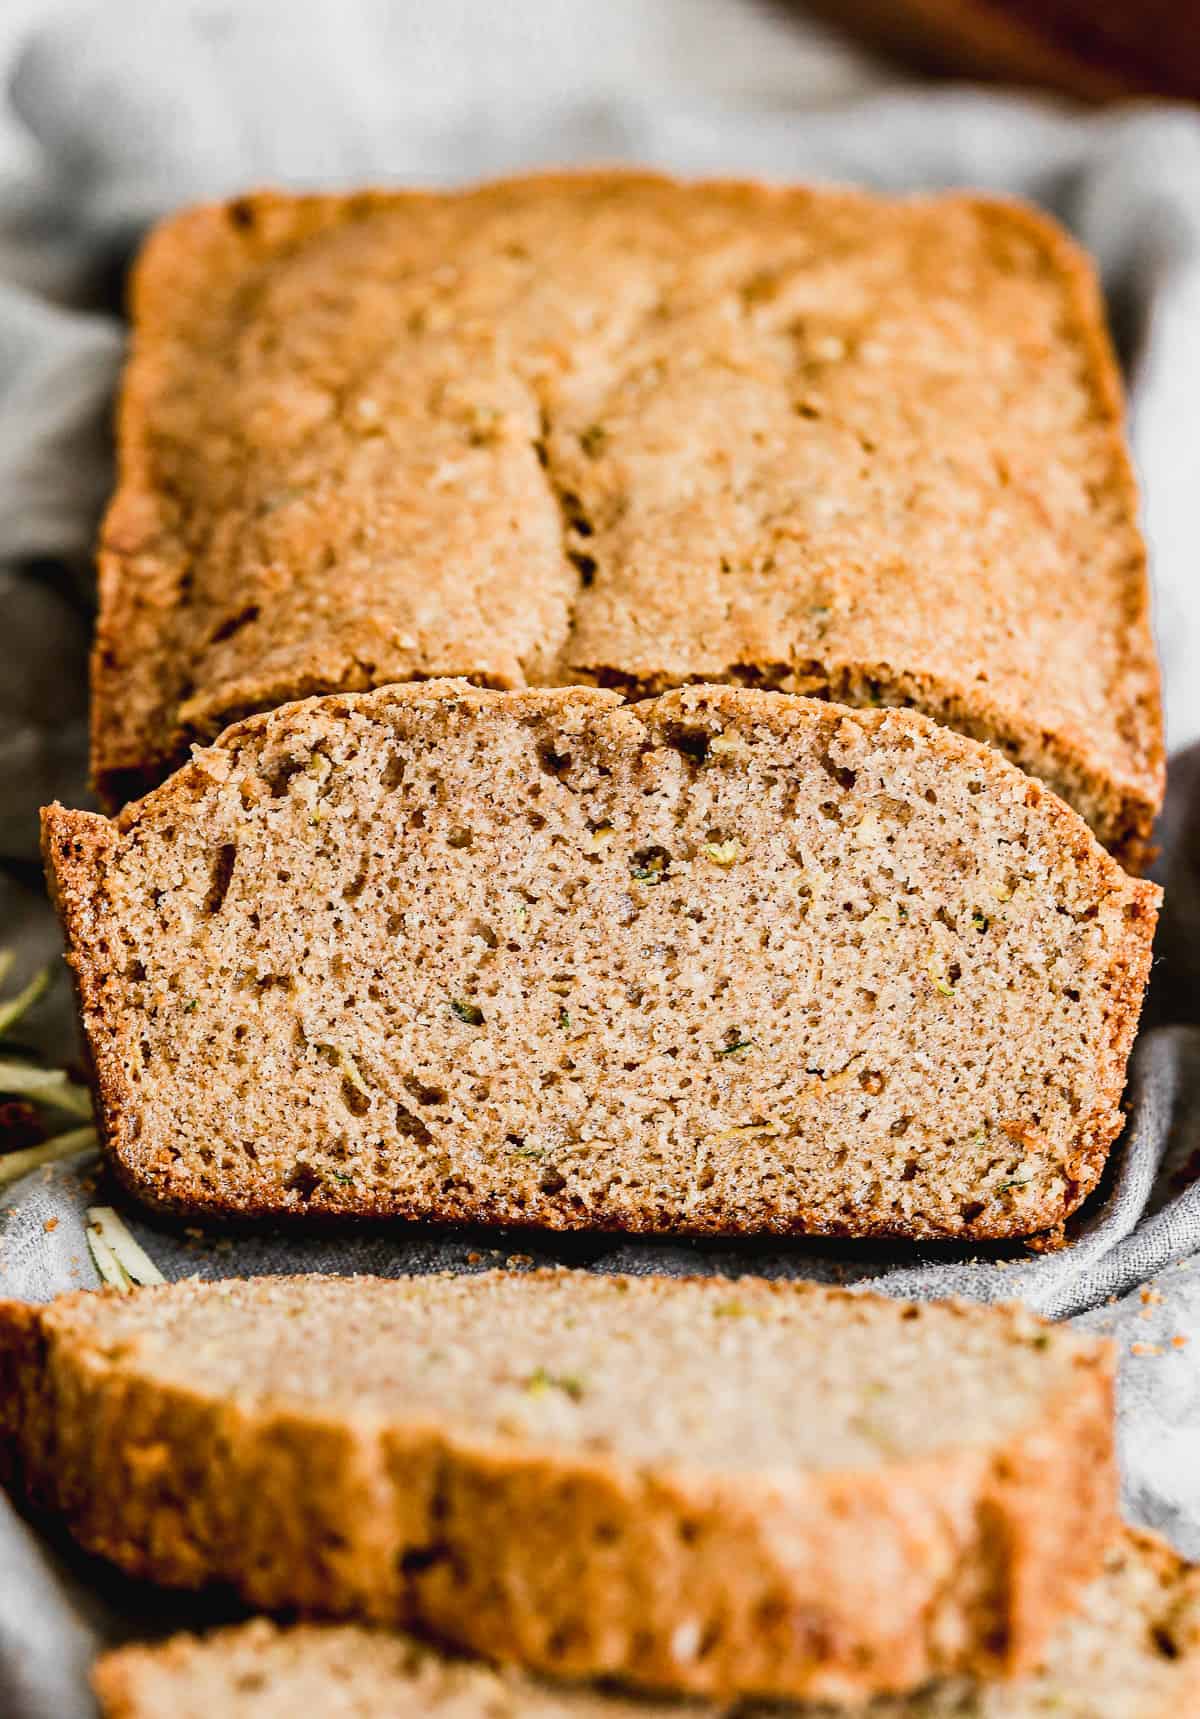 A slice of homemade zucchini bread with a slice cut from it.